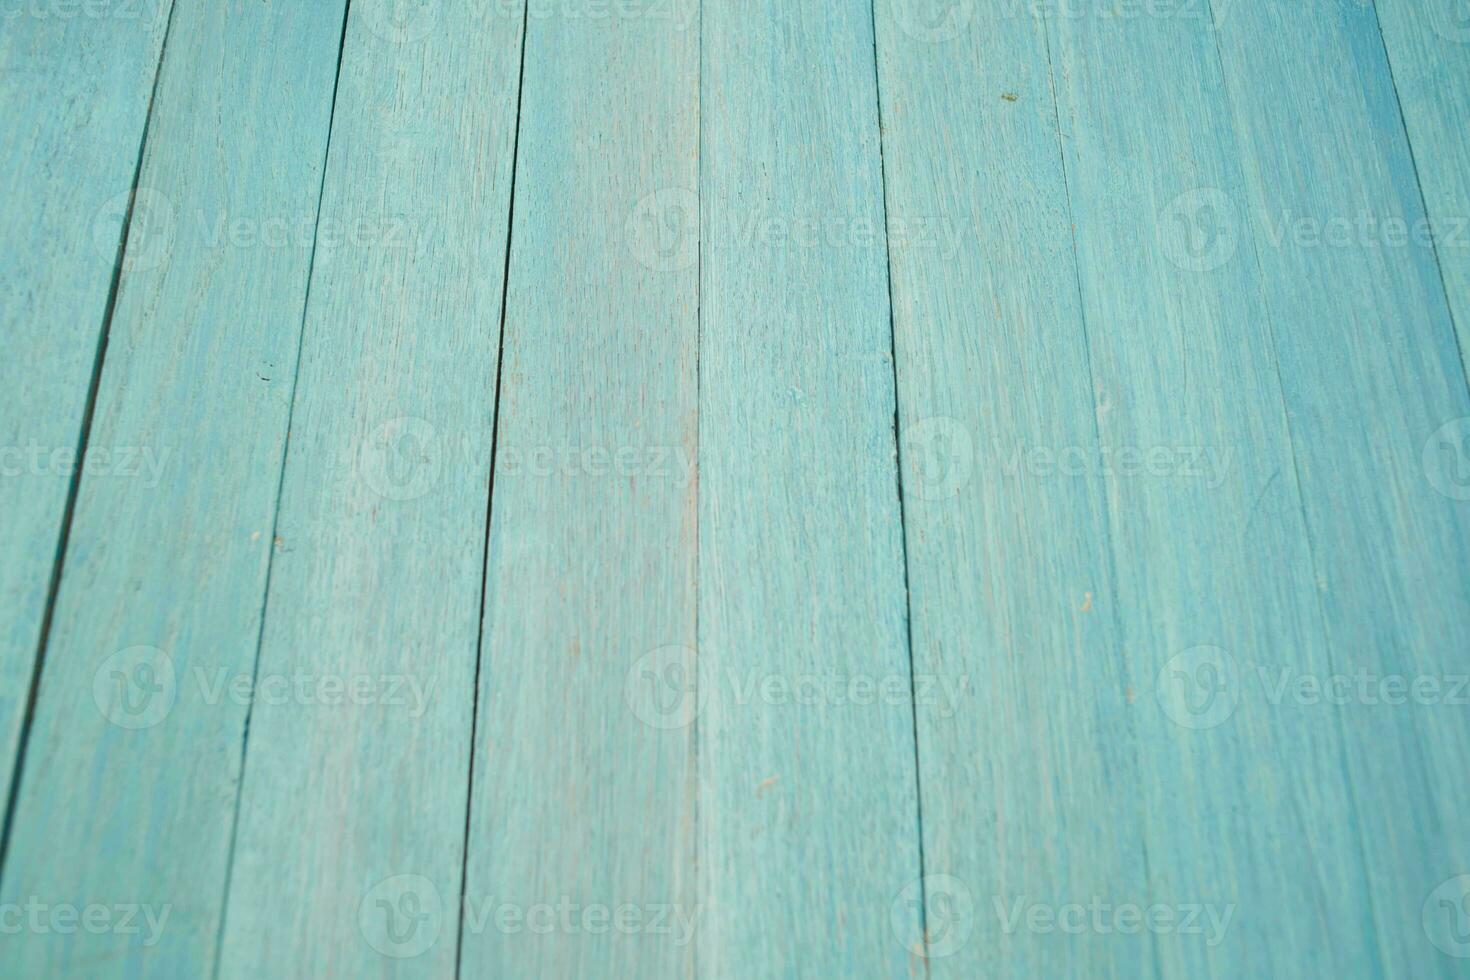 blue wood background plank table texture photo